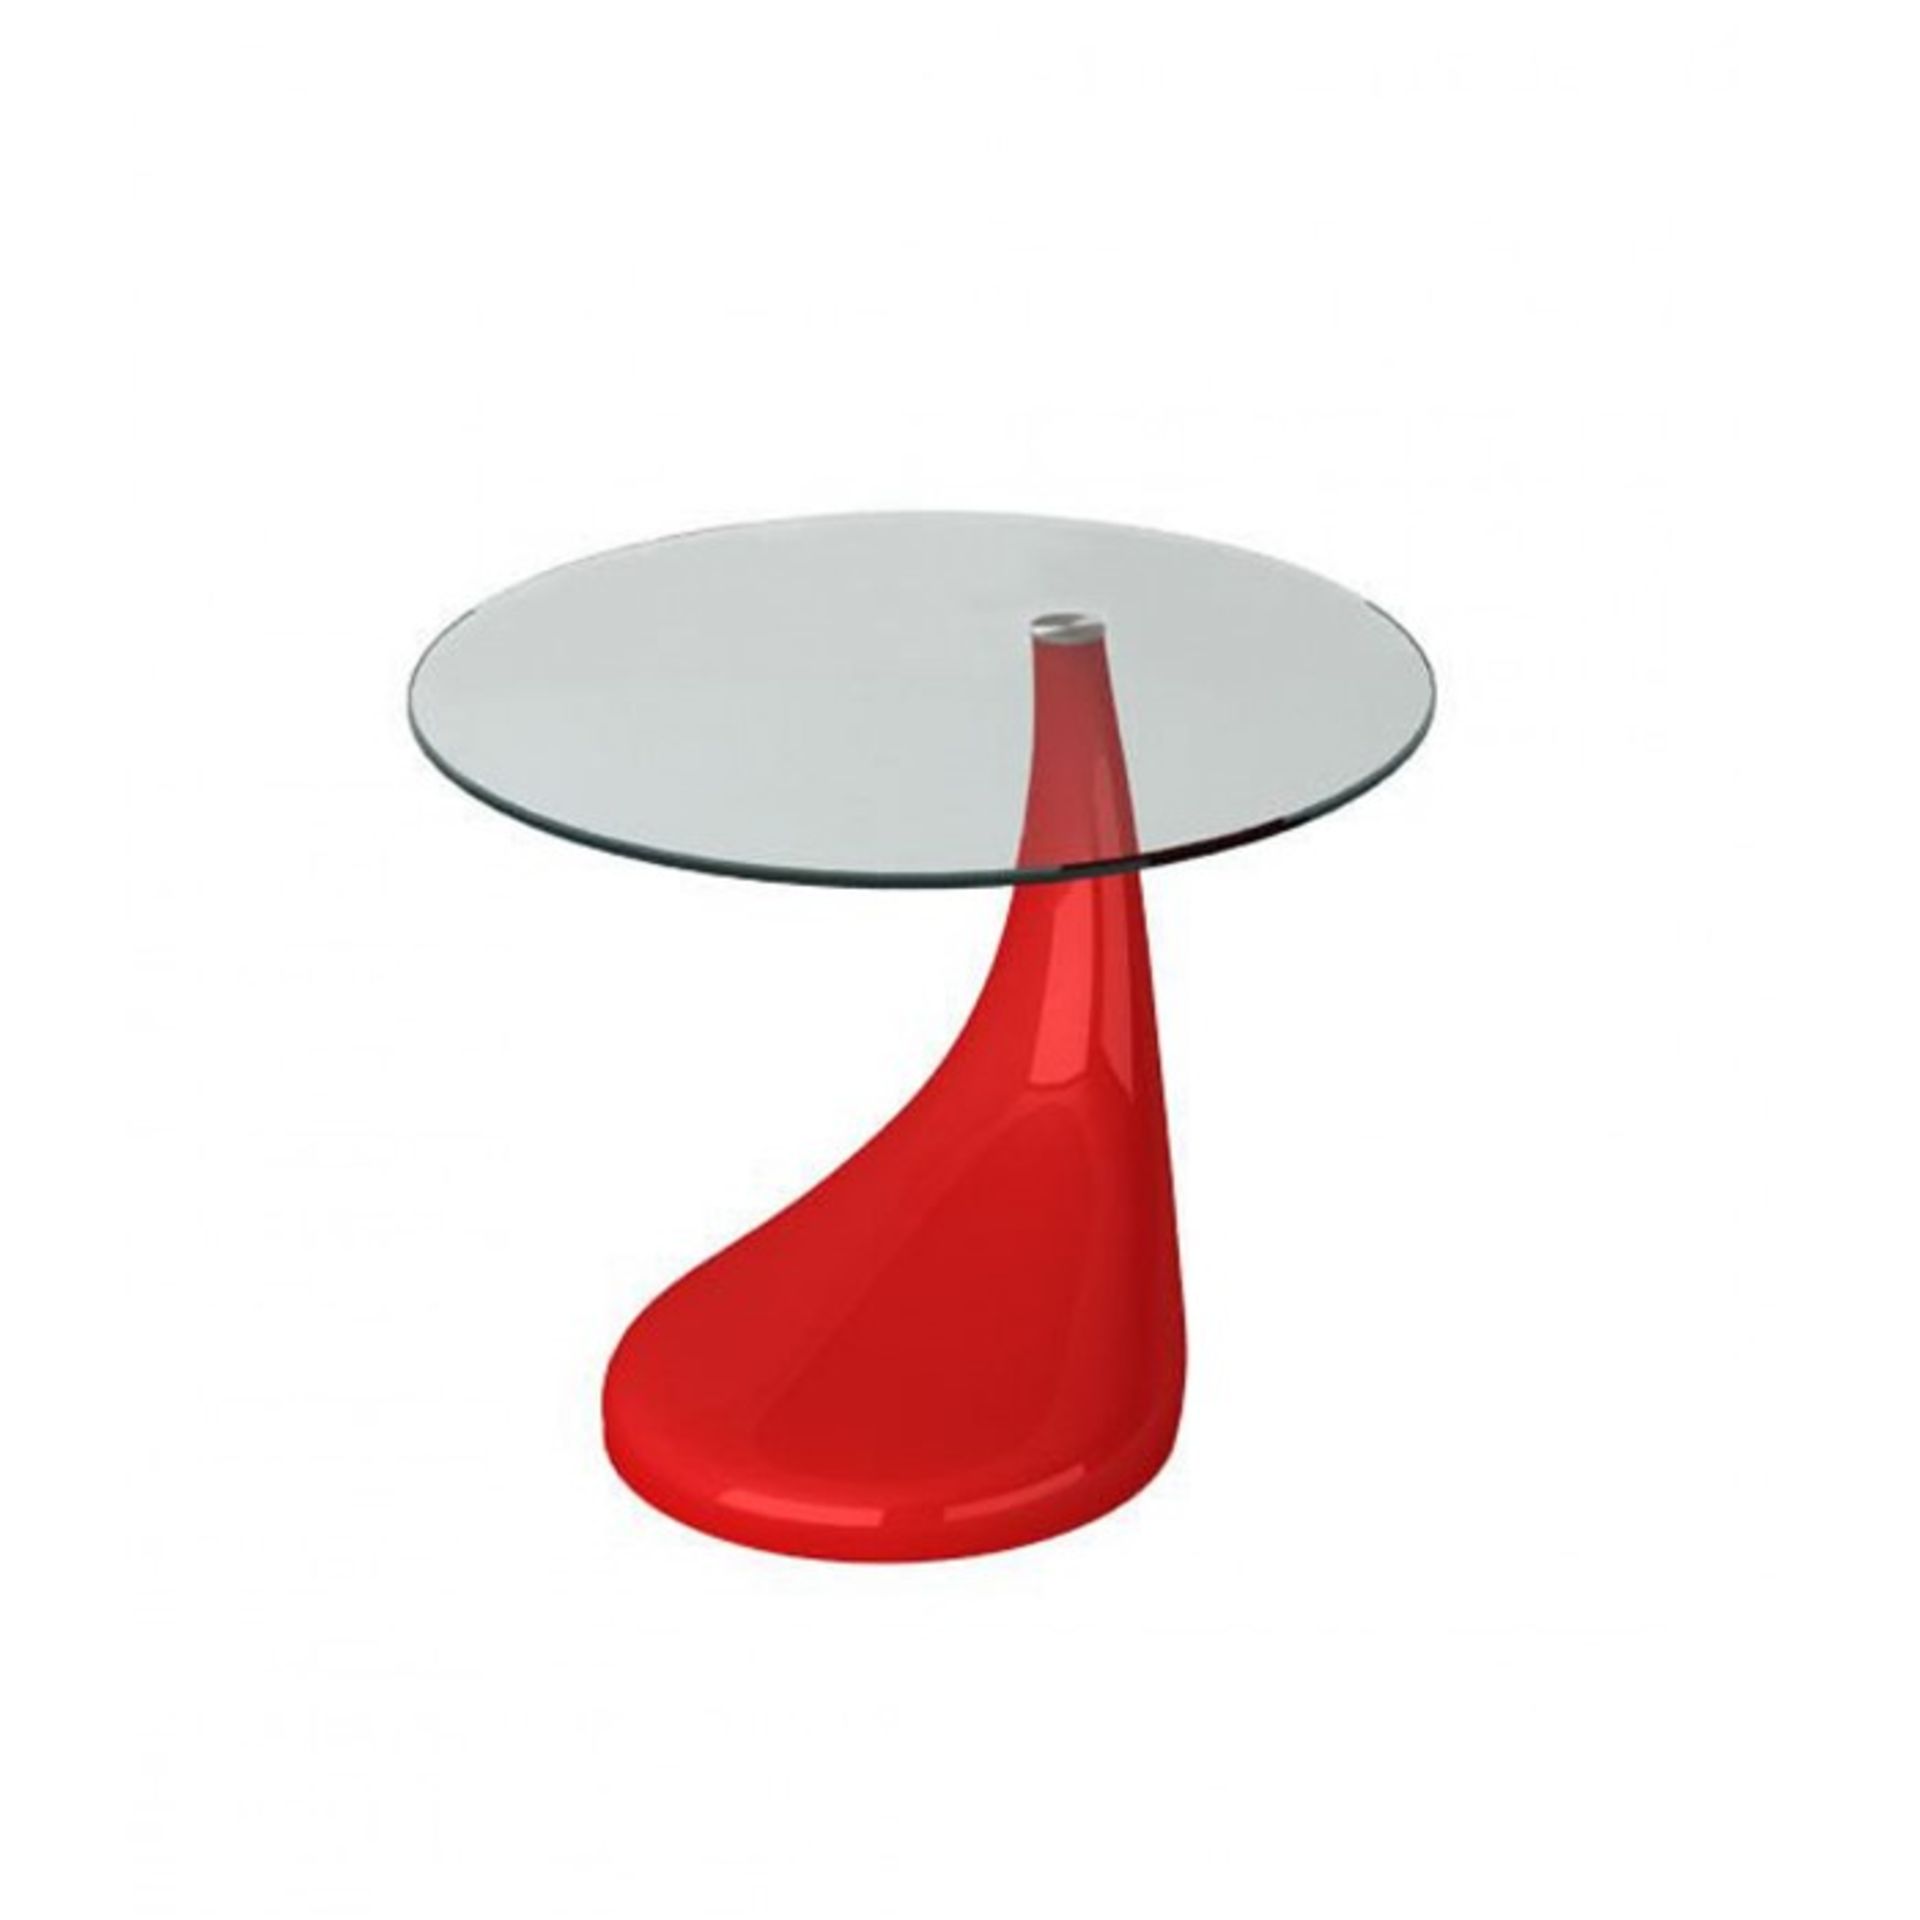 1 AS NEW BOXED TEAR SHAPED COFFEE/SIDE TABLE WITH CLEAR GLASS AND RED HIGH GLOSS BASE / CTB415RED